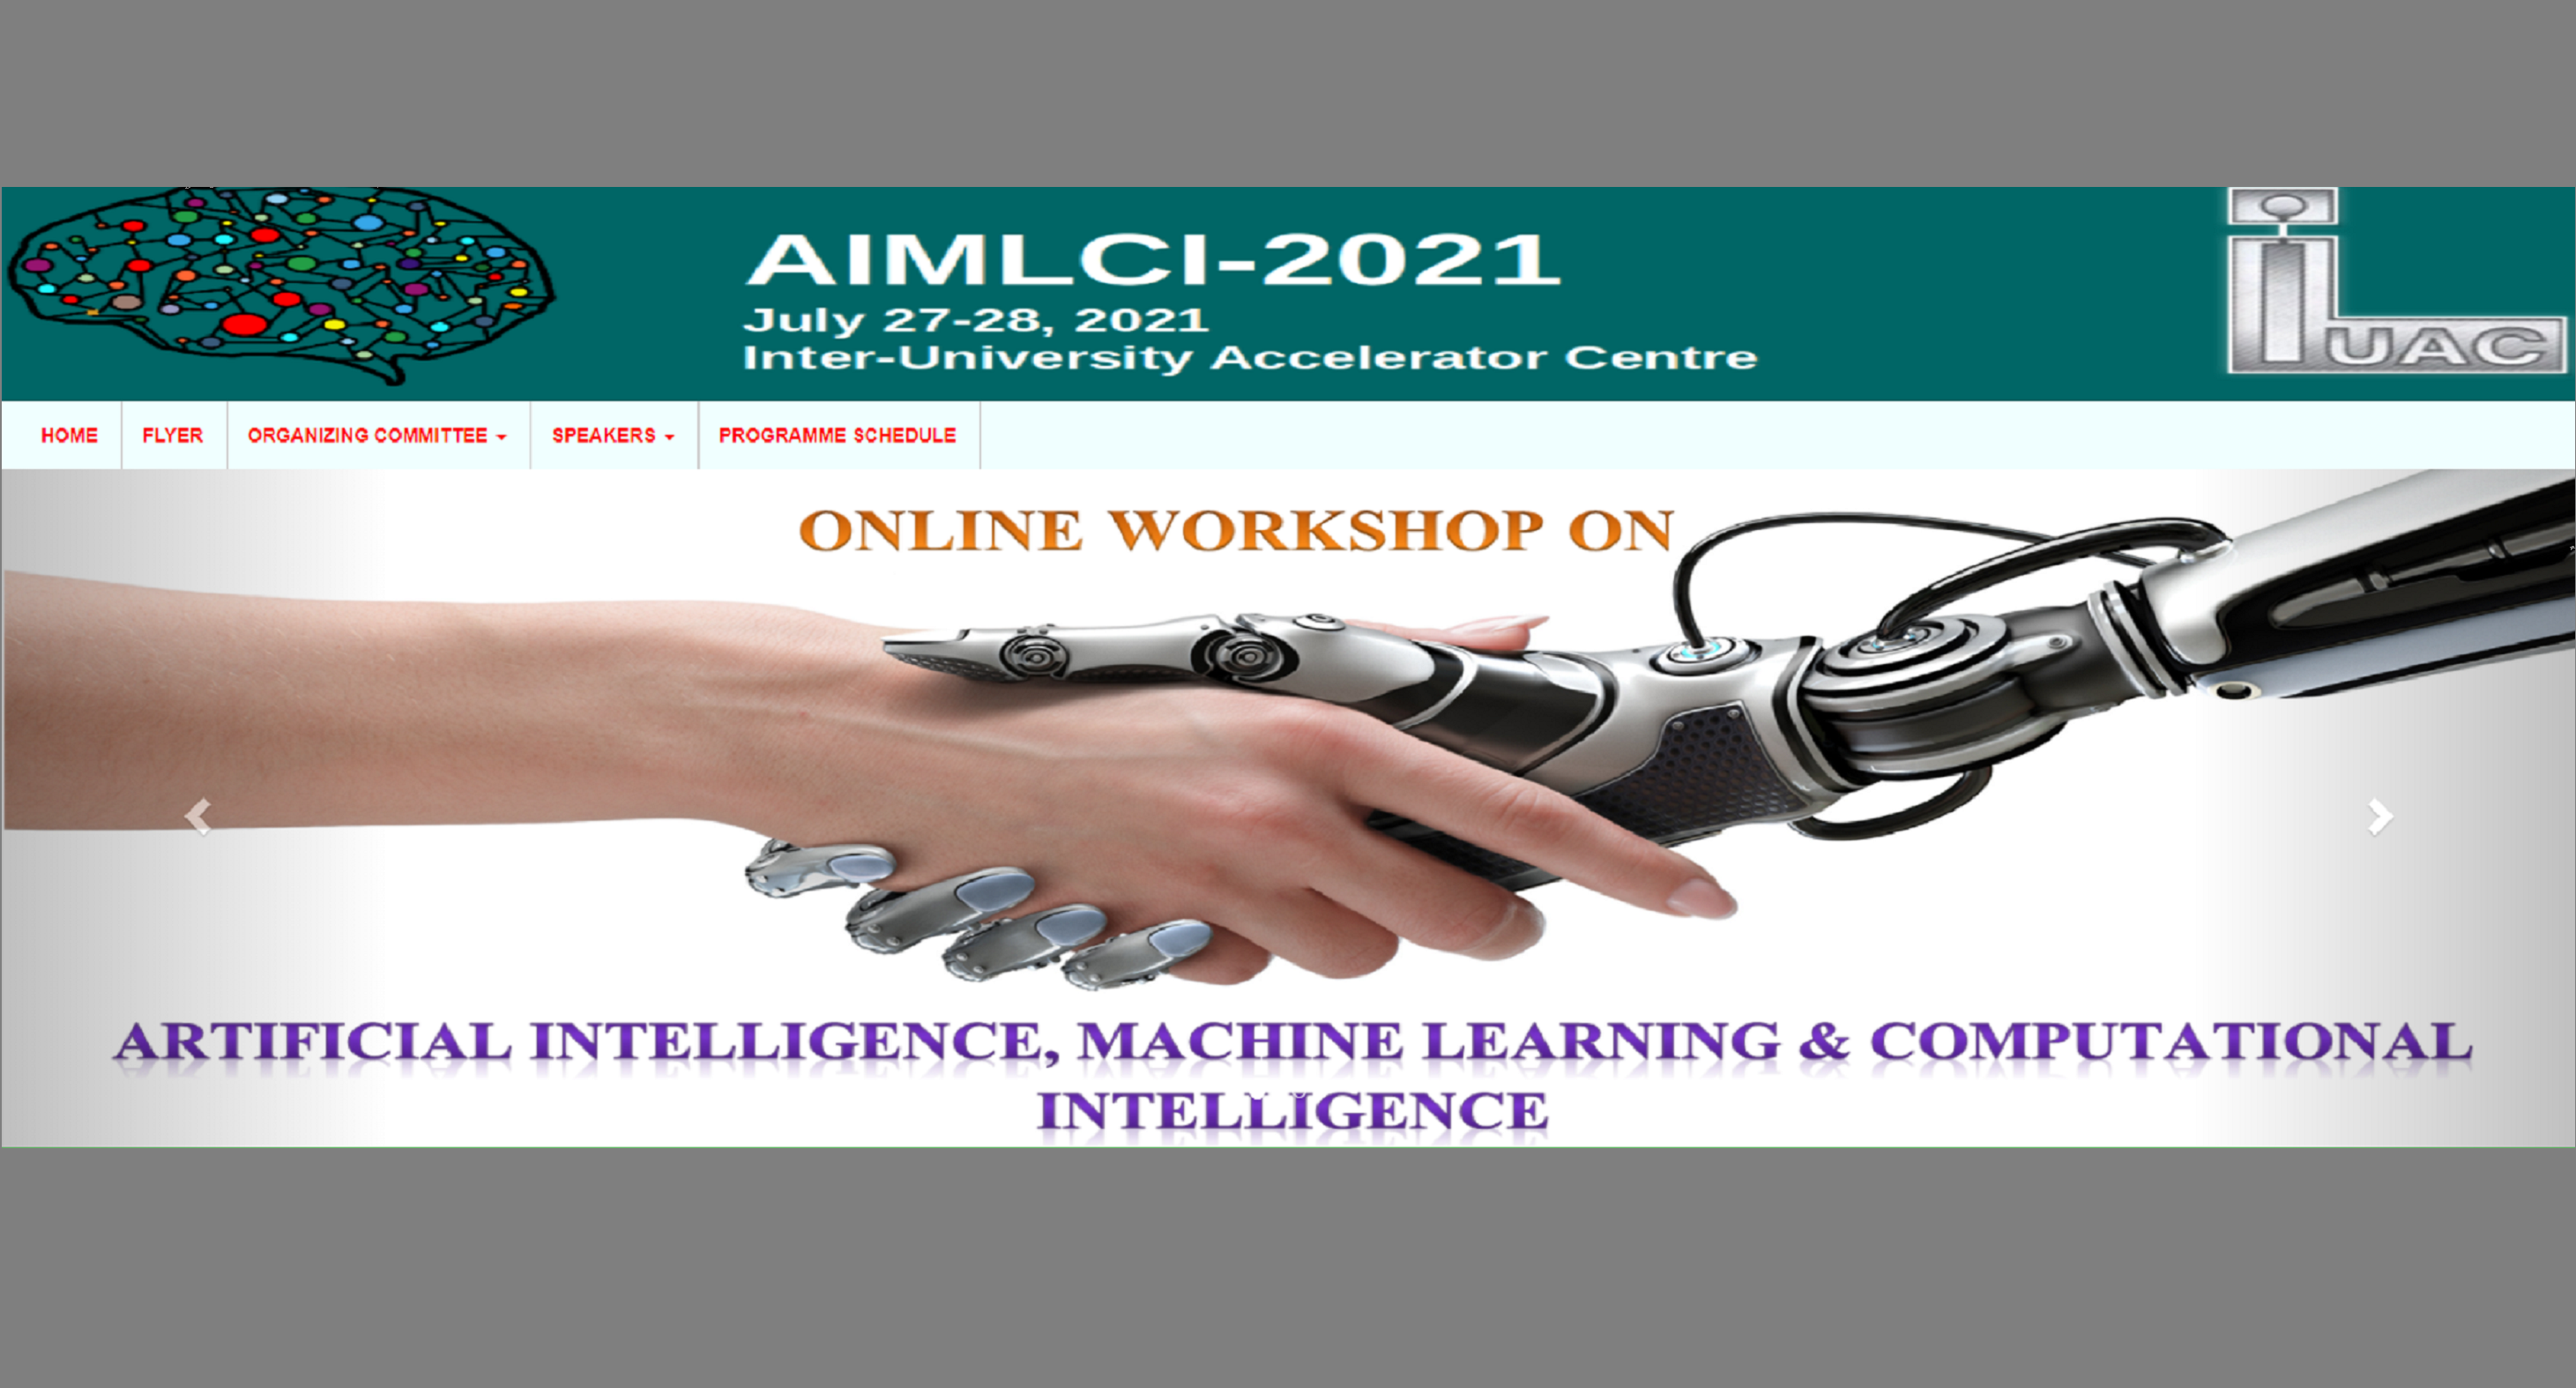 Two day online workshop on Artificial Intelligence, Machine Learning and Computational Intelligence IUAC AIMLCI-2021 on 27-28th July 2021. Free Registrations